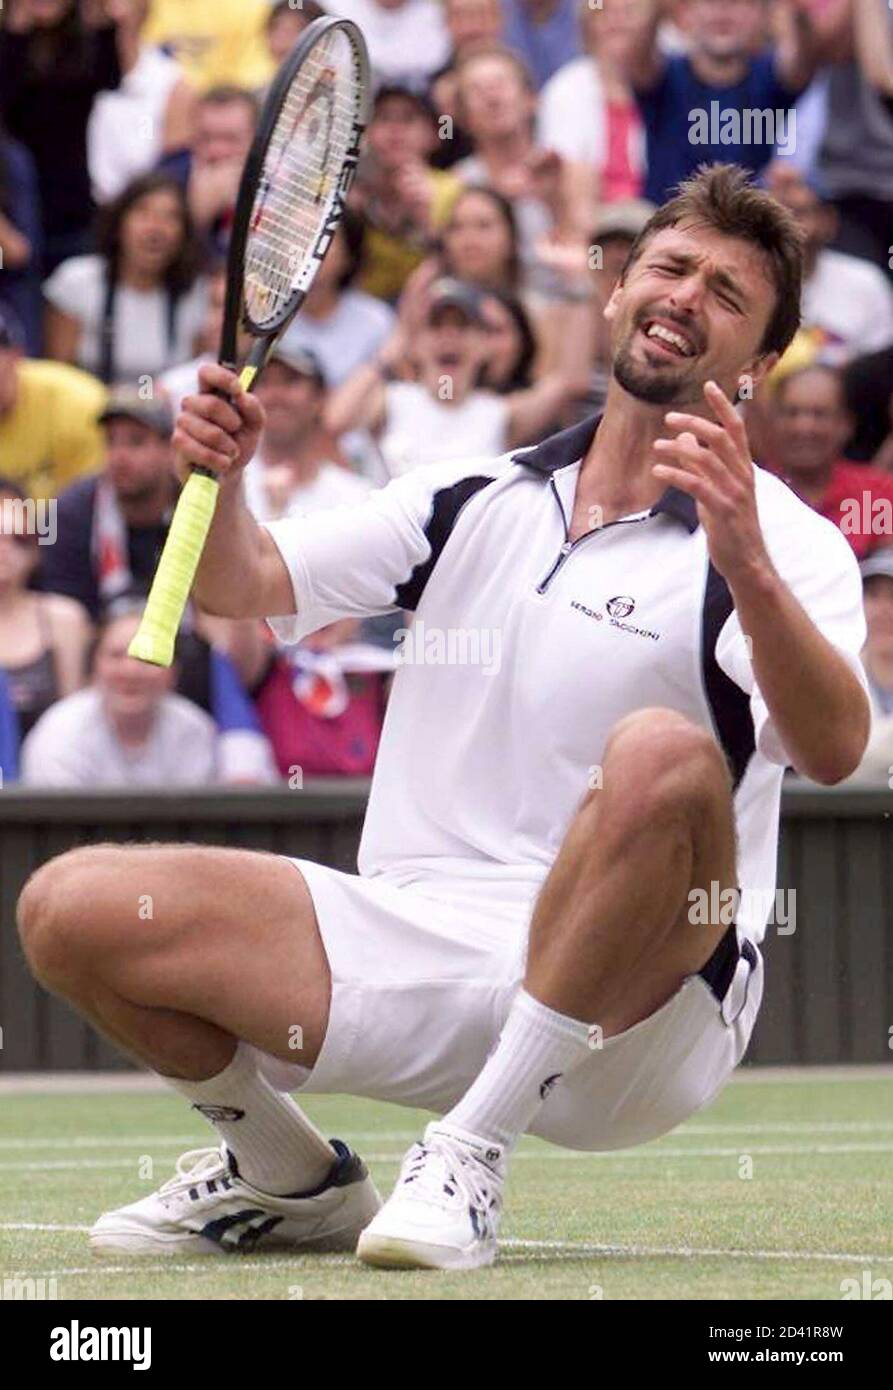 Croatia's Goran Ivanisevic celebrates after beating Pat Rafter of Australia  to win the men's final at the Wimbledon Championships July 9, 2001.  Ivanisevic beat Rafter 6-3 3-6 6-3 2-6 9-7. ps Stock Photo - Alamy